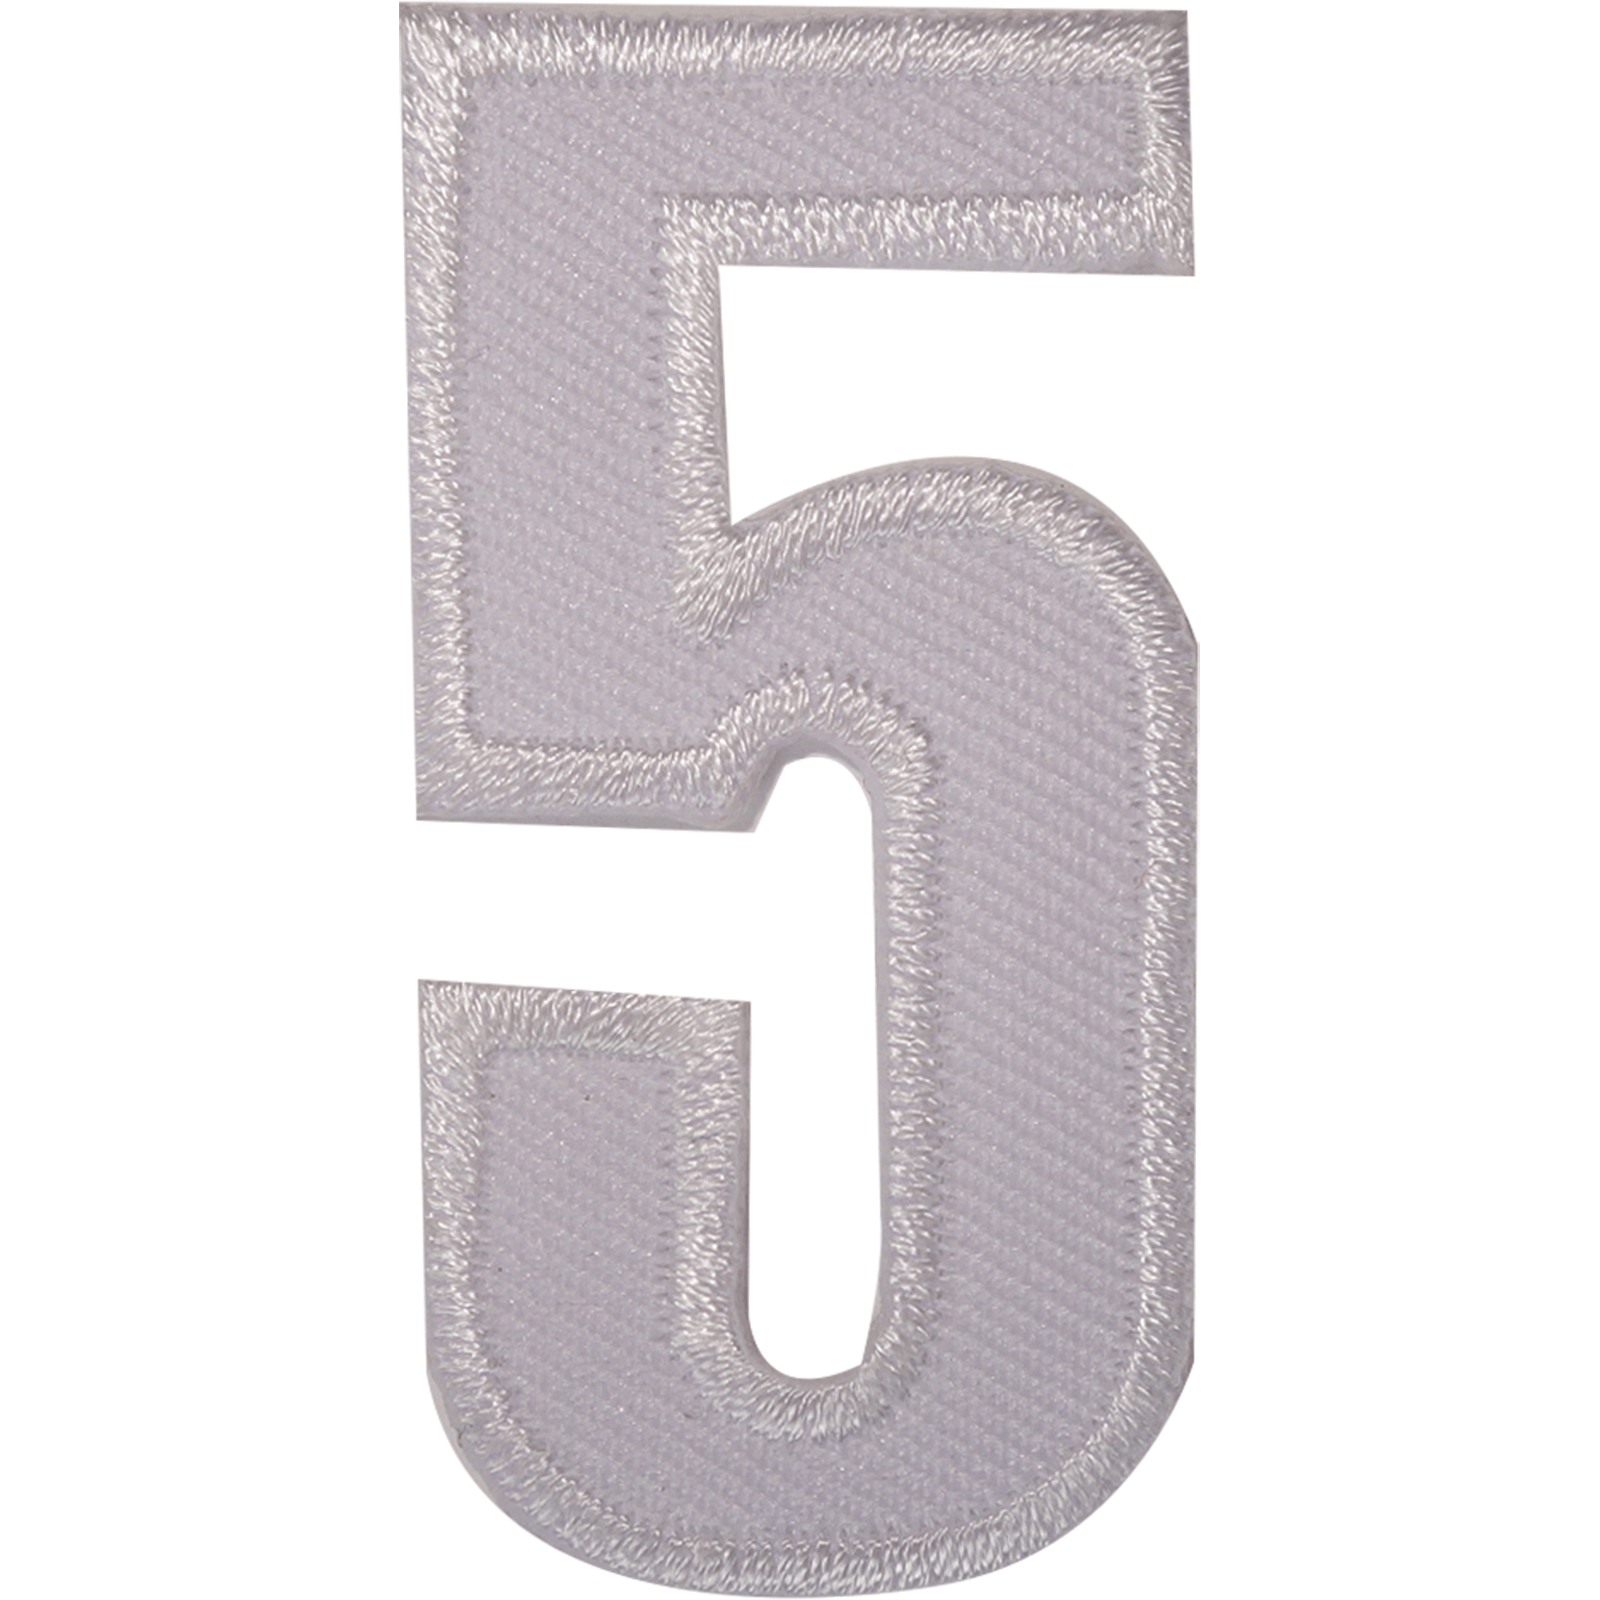 Number 5 ( Number Five ) White Letter Number Iron Sew On Patches Badges Name Letters Numbers Badge Patch